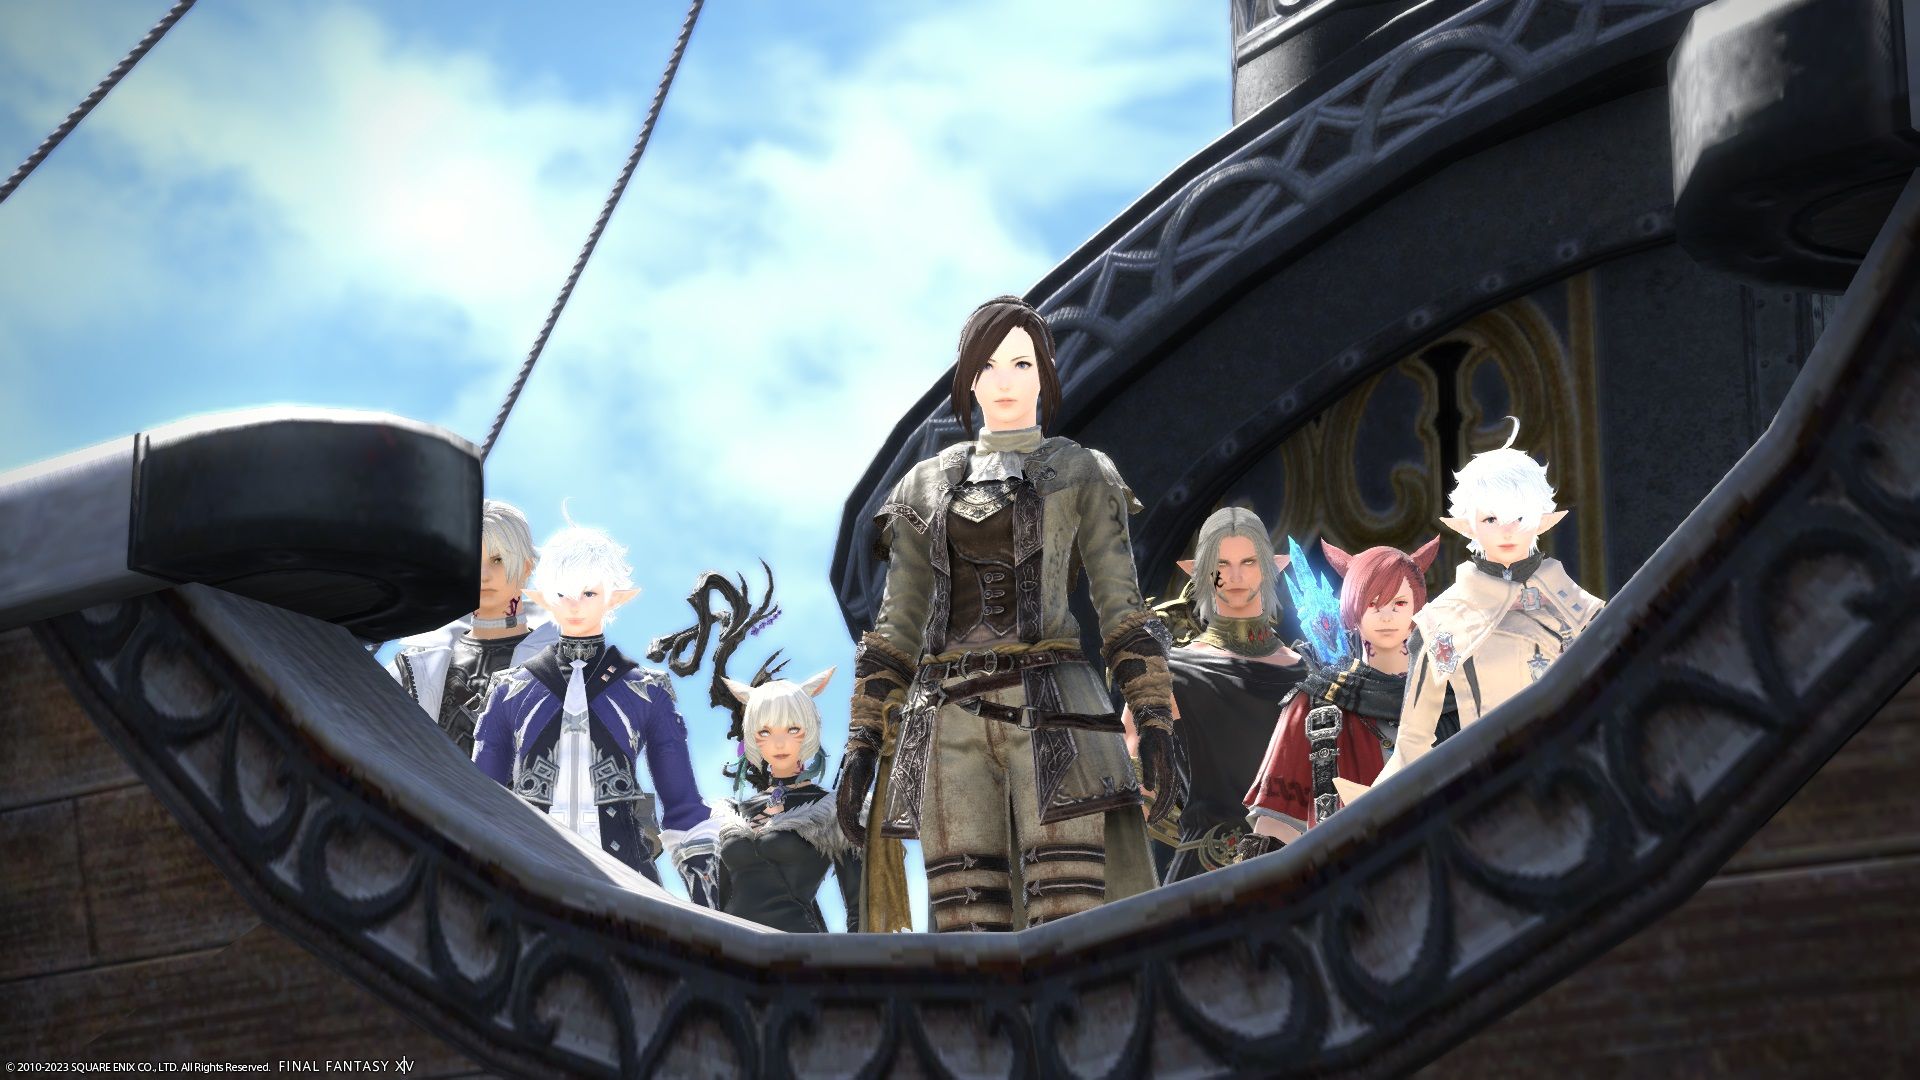 Final Fantasy 14 - The Warrior of Light standing with the Scions aboard a board sailing to Old Sharlayan.